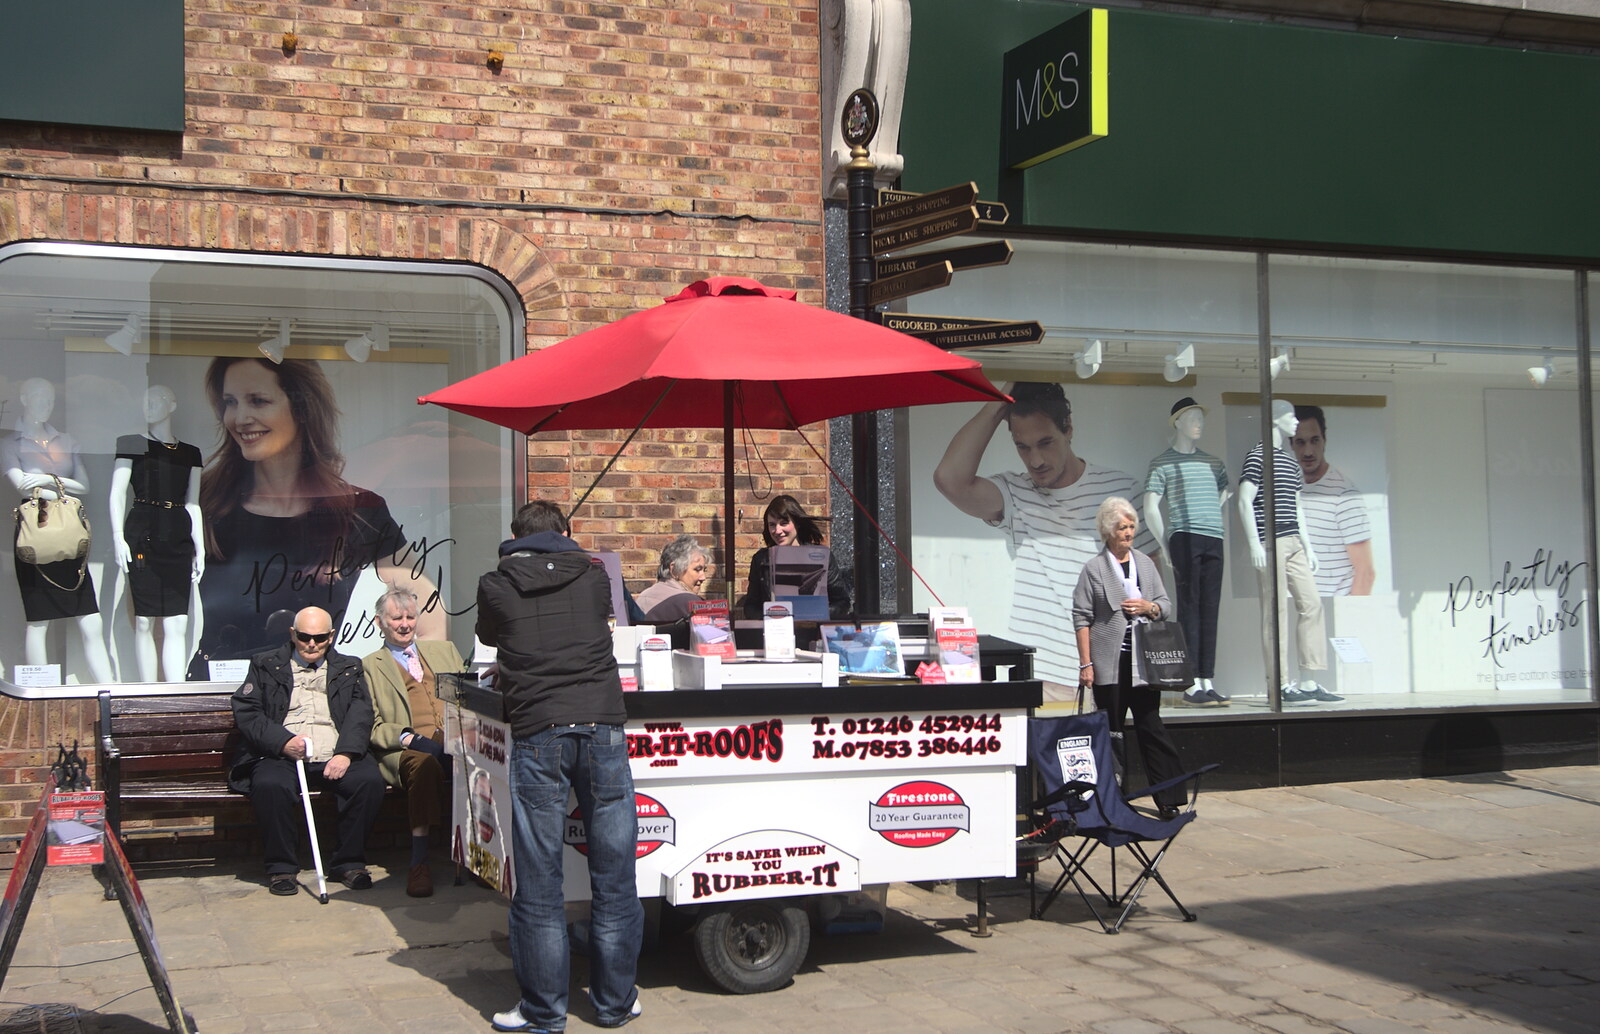 A portable stall tries to sell rubber roofing from Chesterfield and the Twisty Spire, Derbyshire - 19th April 2013